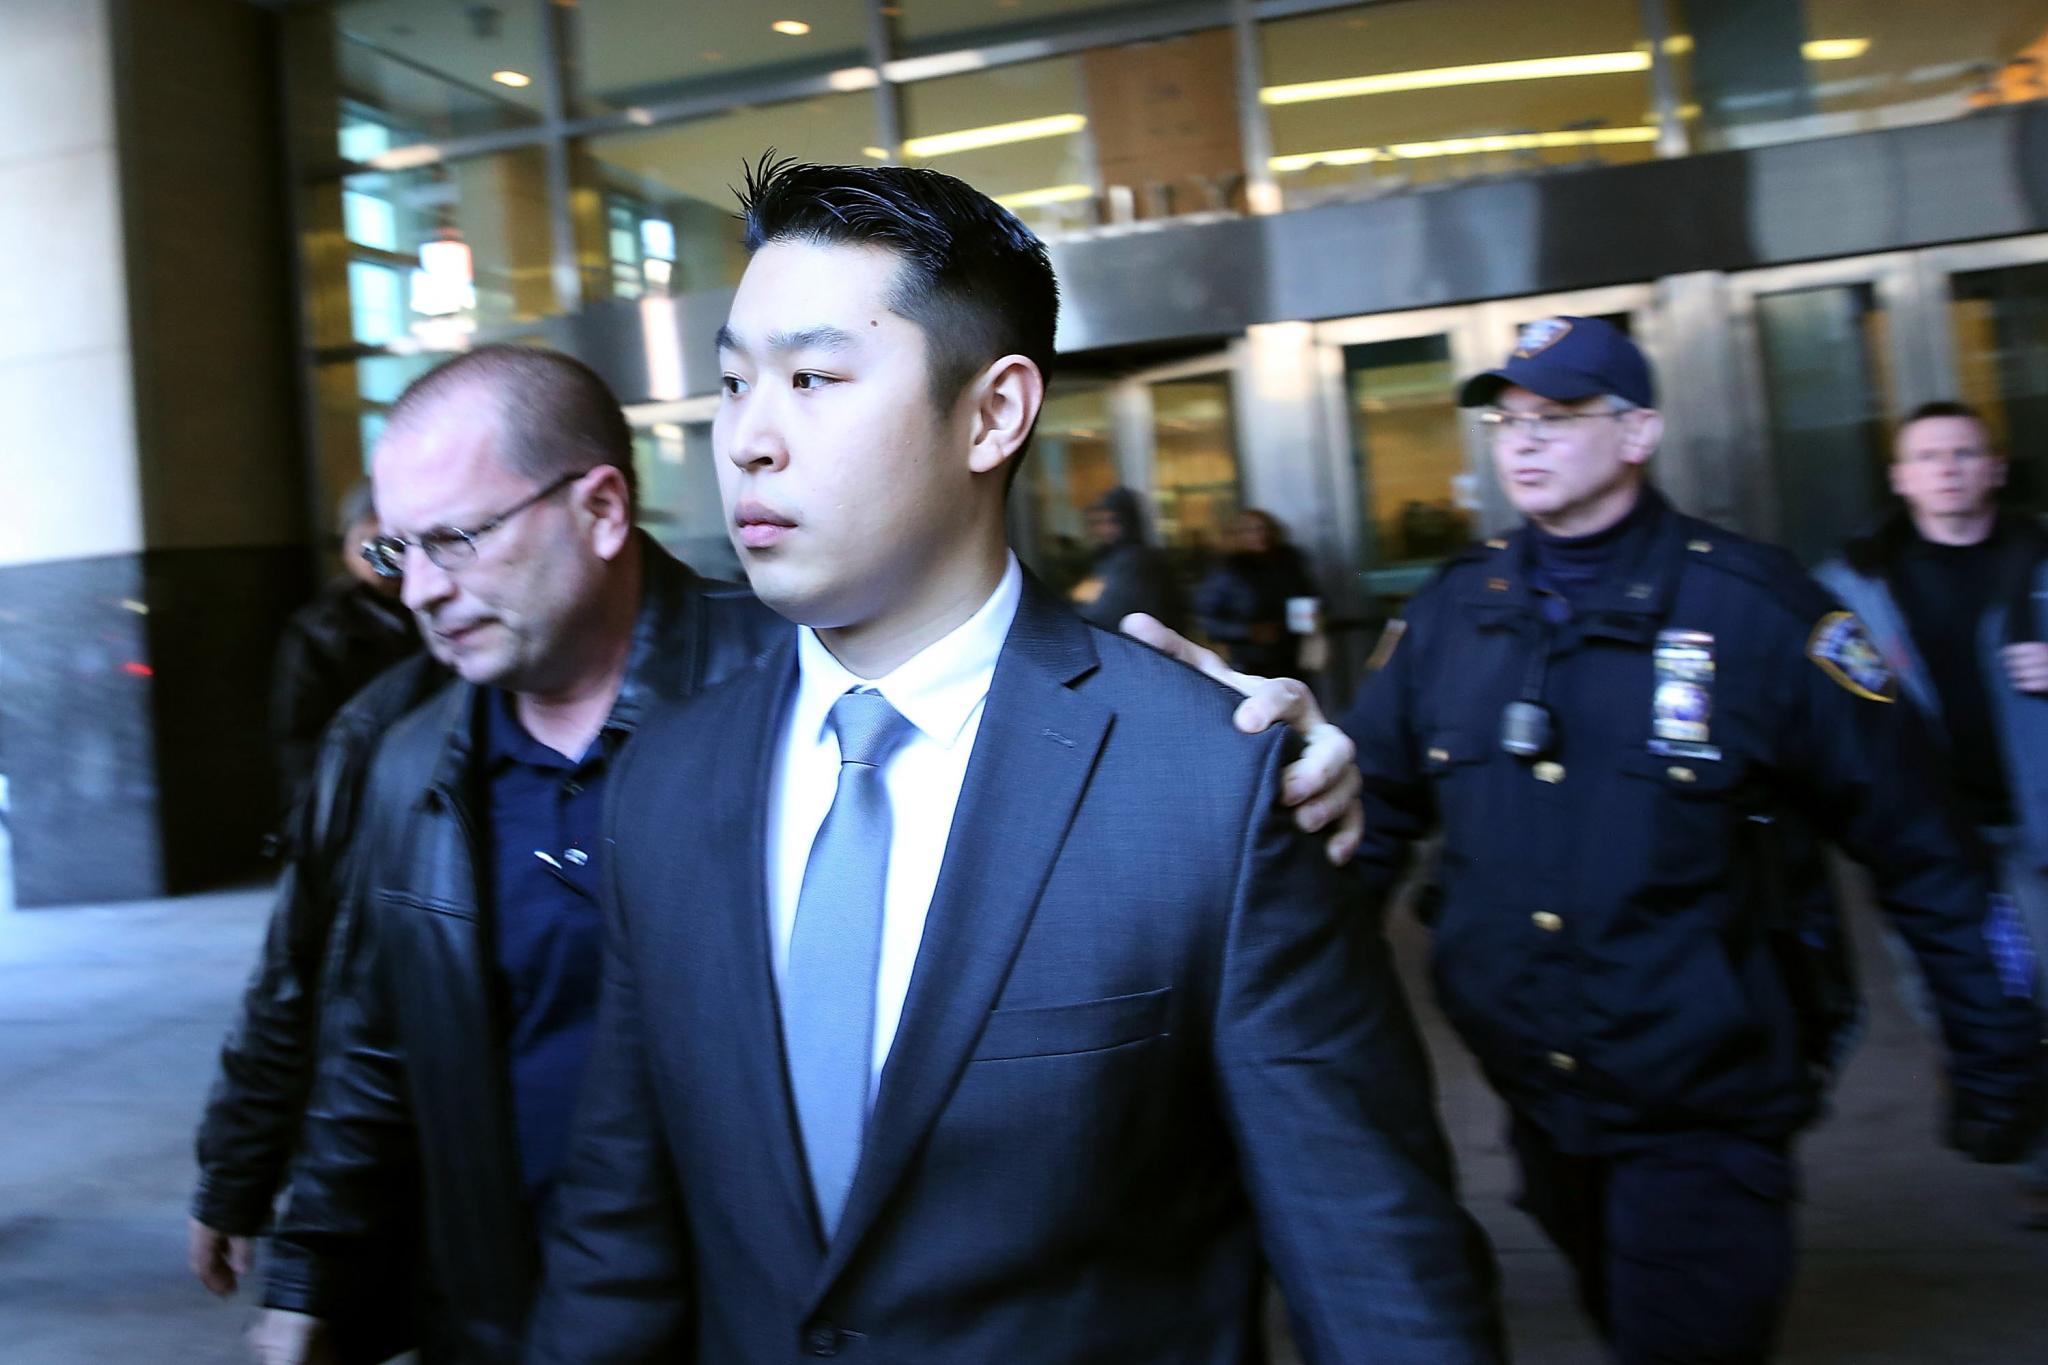 New York Prosecutor Will Not Recommend Prison Time for Officer Who Killed Akai Gurley